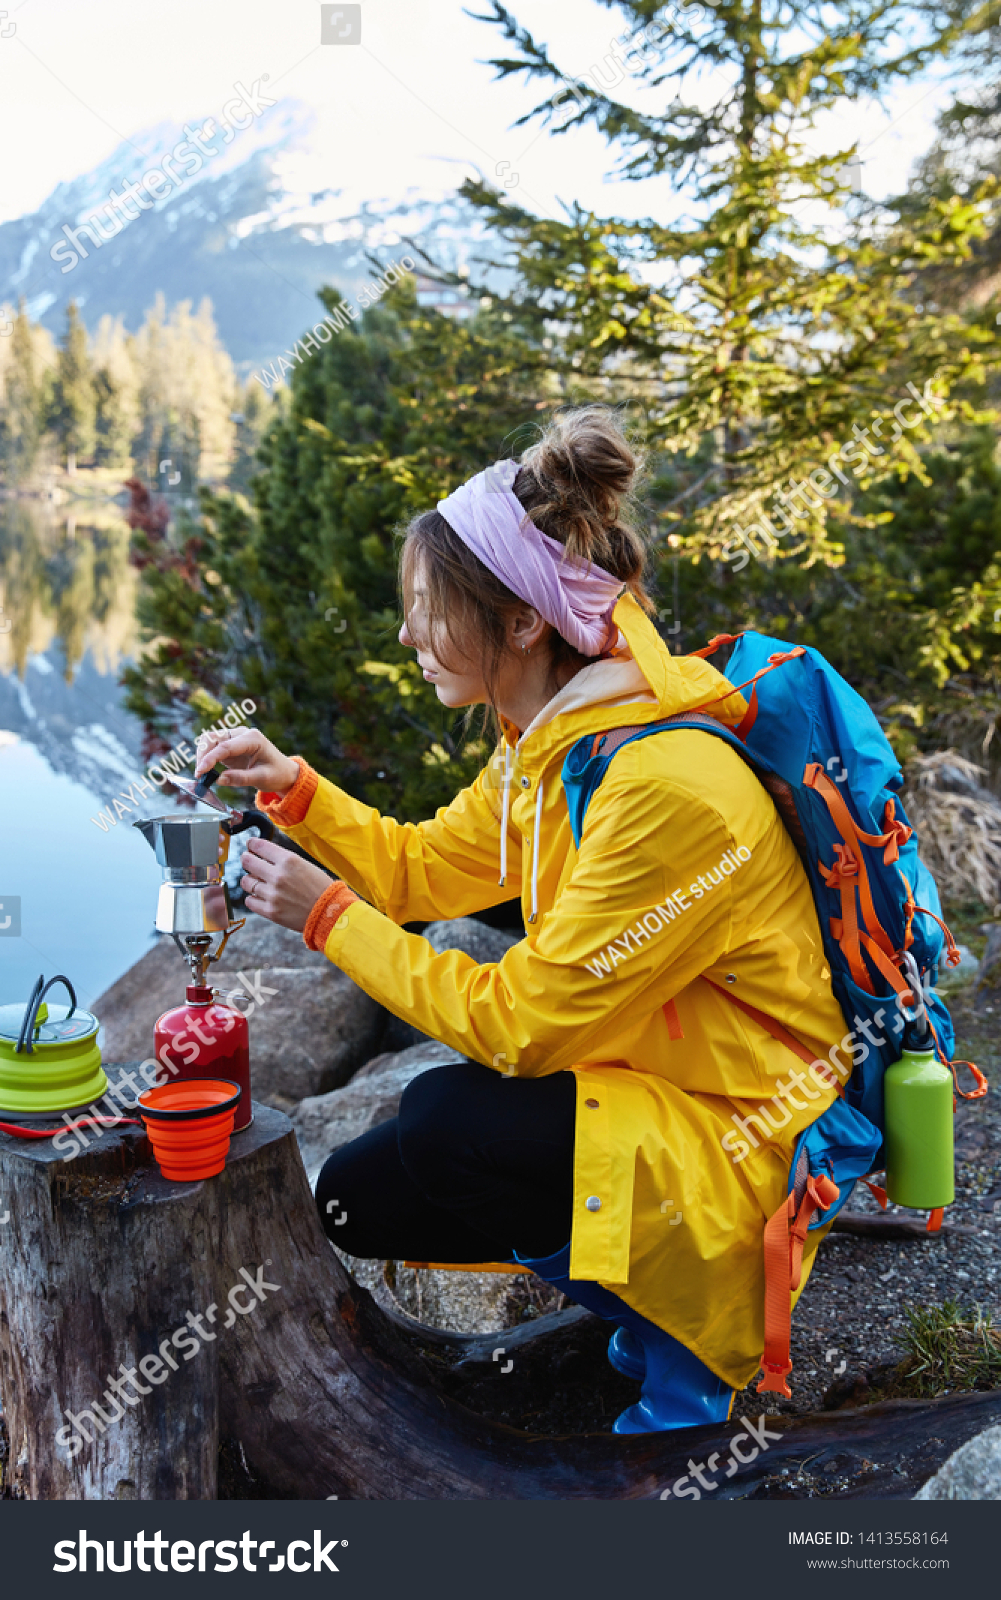 Restful female traveler makes coffee on camping stove, poses near stump, has break after wandering, poses against wonderful nature with lake, mountains and fir trees, enjoys life and traveling #1413558164